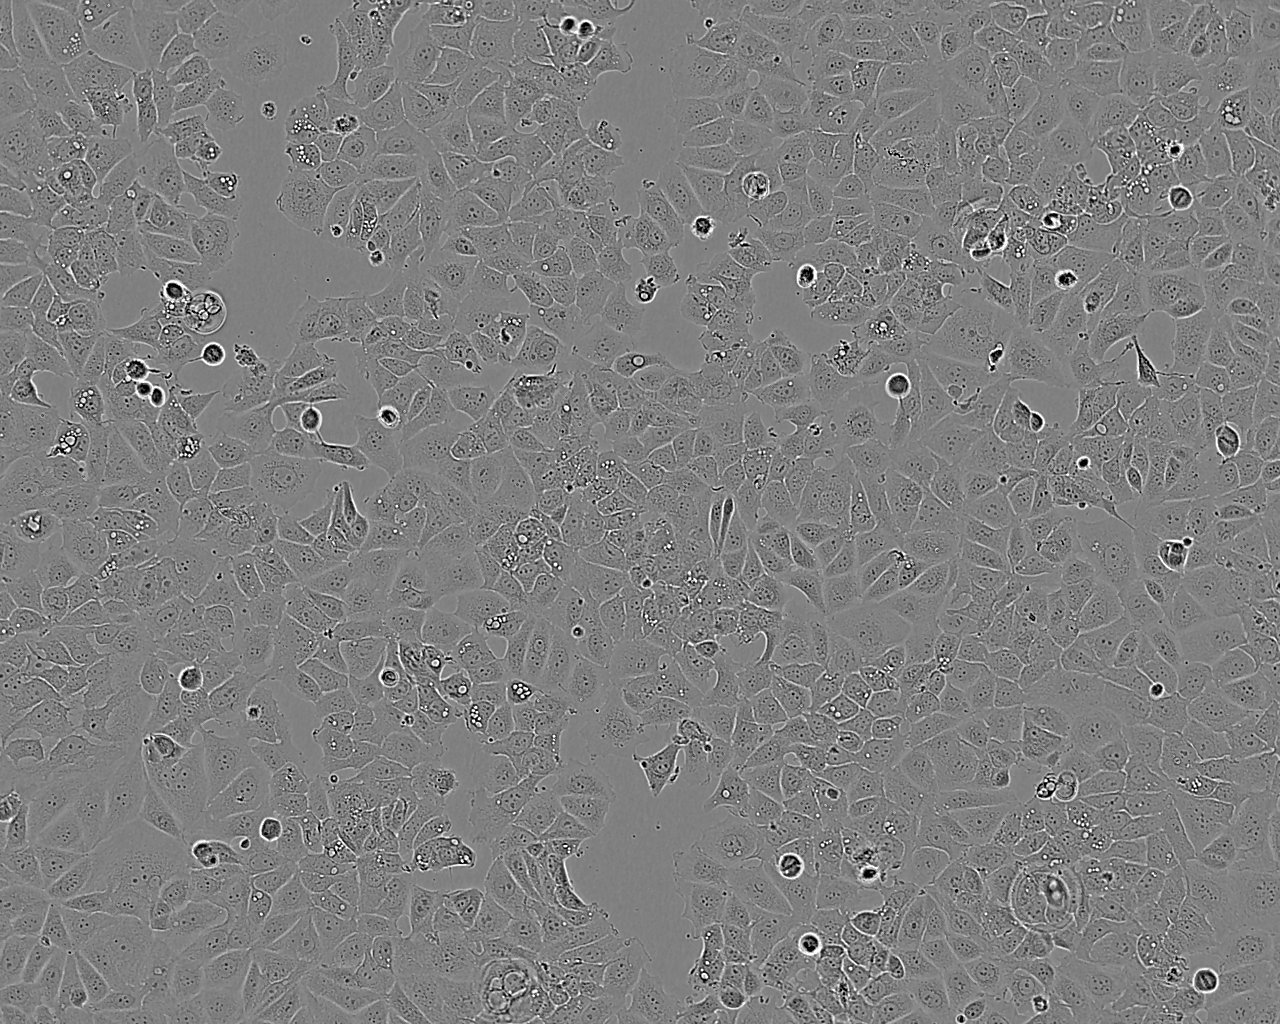 NCI-H522 Epithelial Cell|人肺癌传代细胞(有STR鉴定),NCI-H522 Epithelial Cell